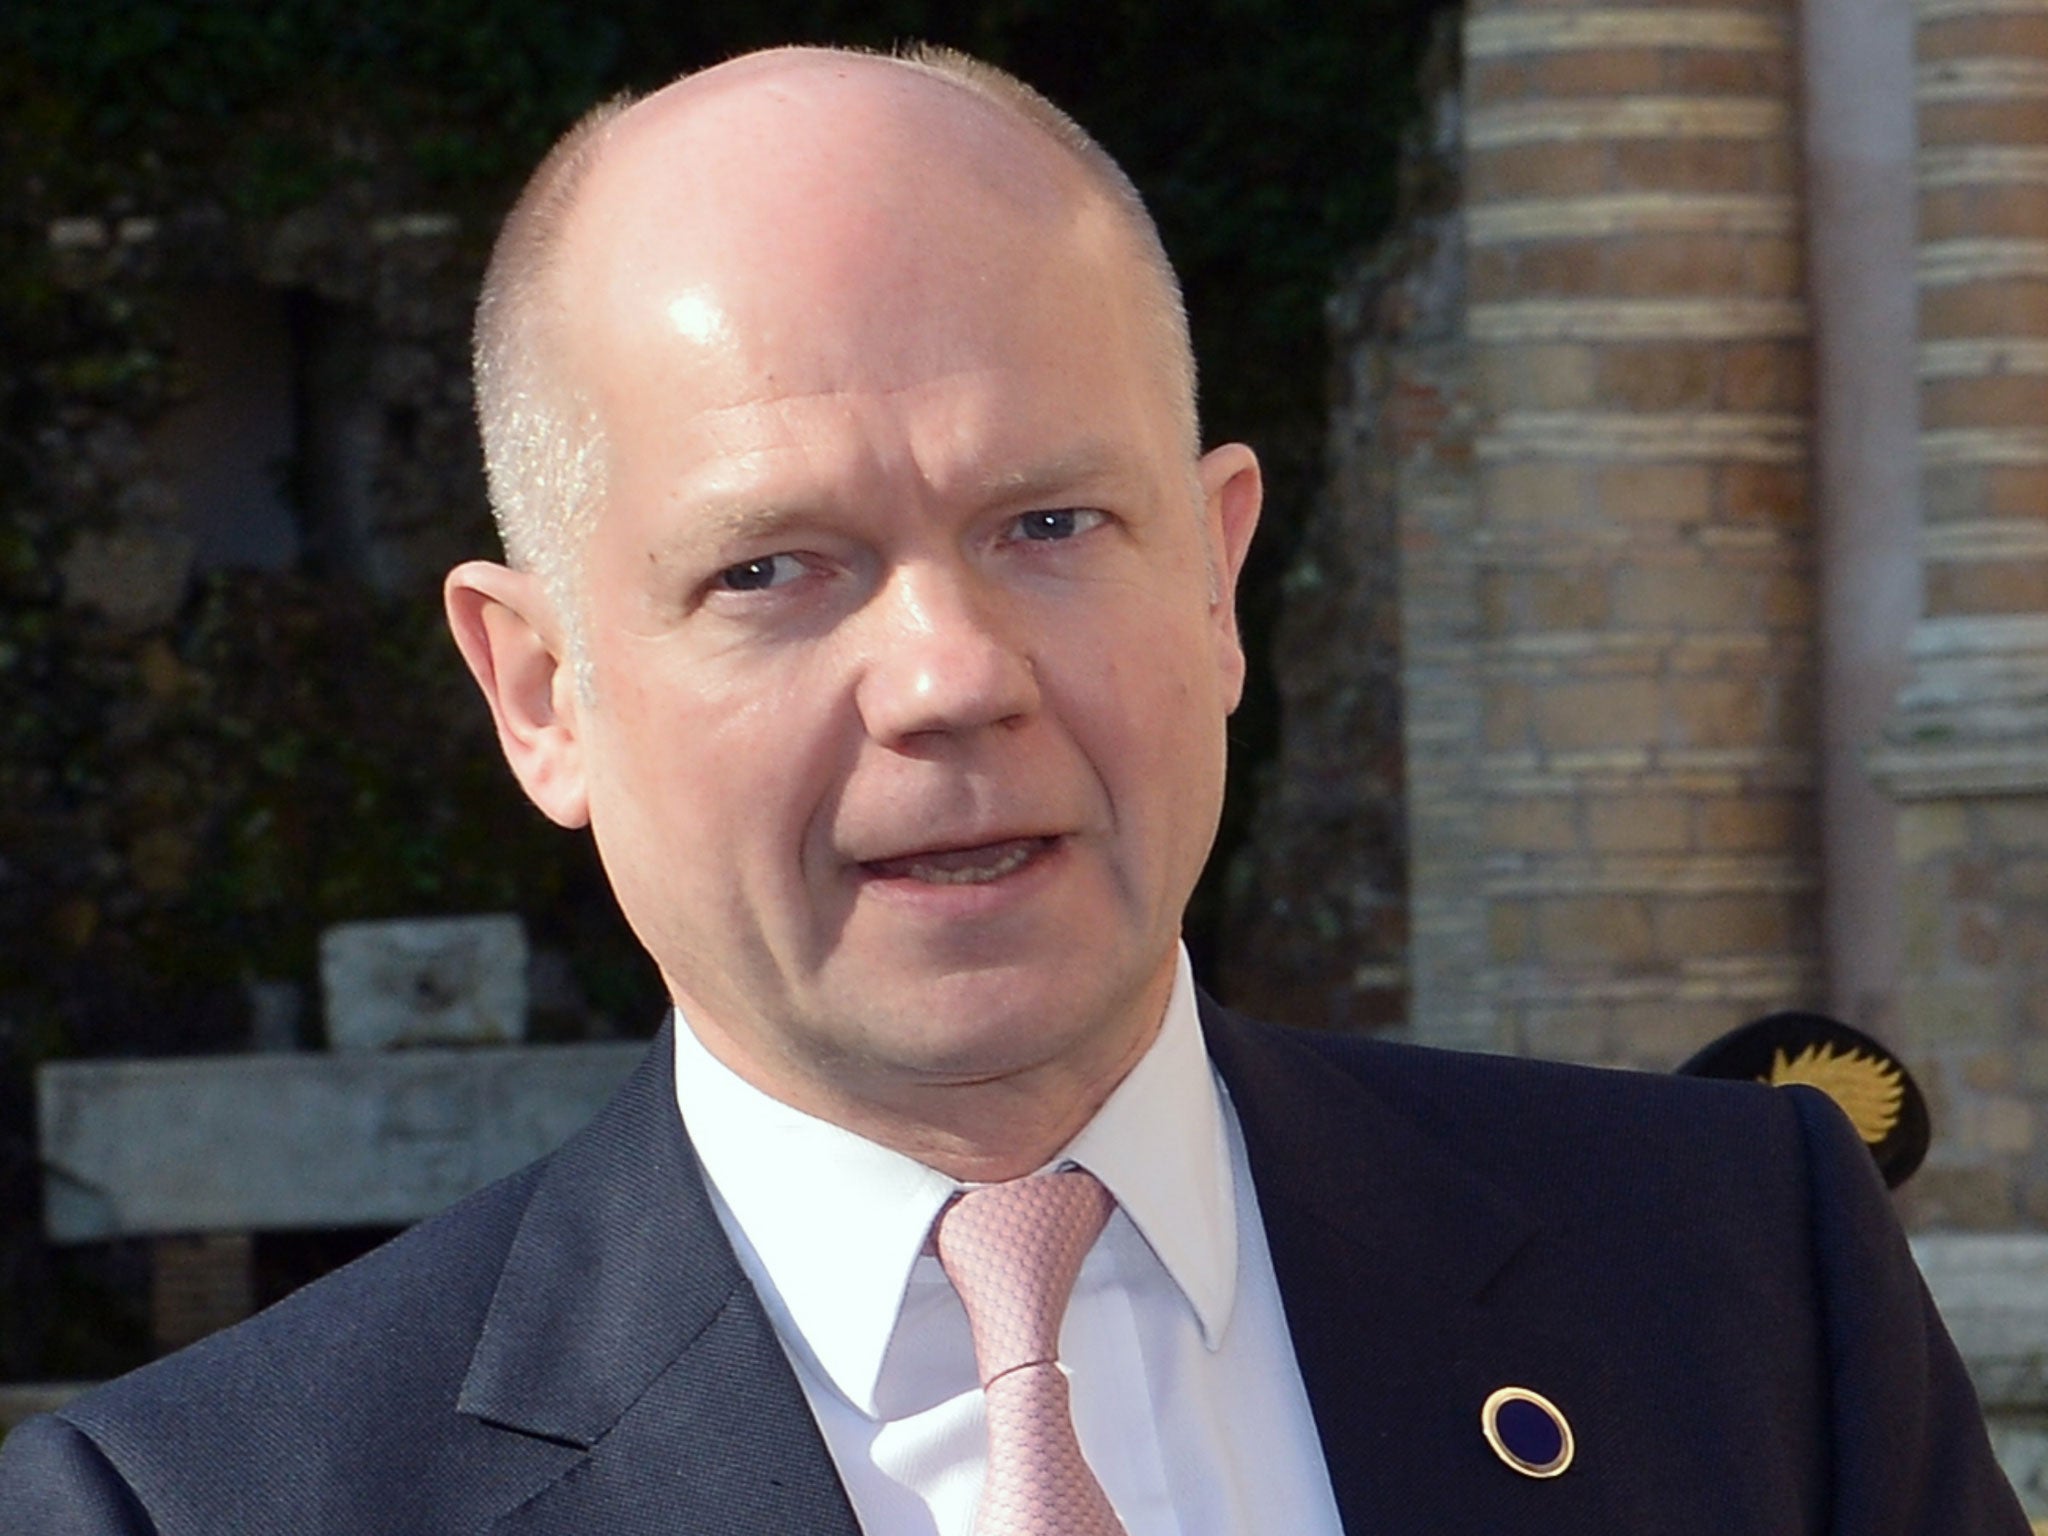 The Foreign Secretary, William Hague, says he will not rule out further UK intervention in Syria